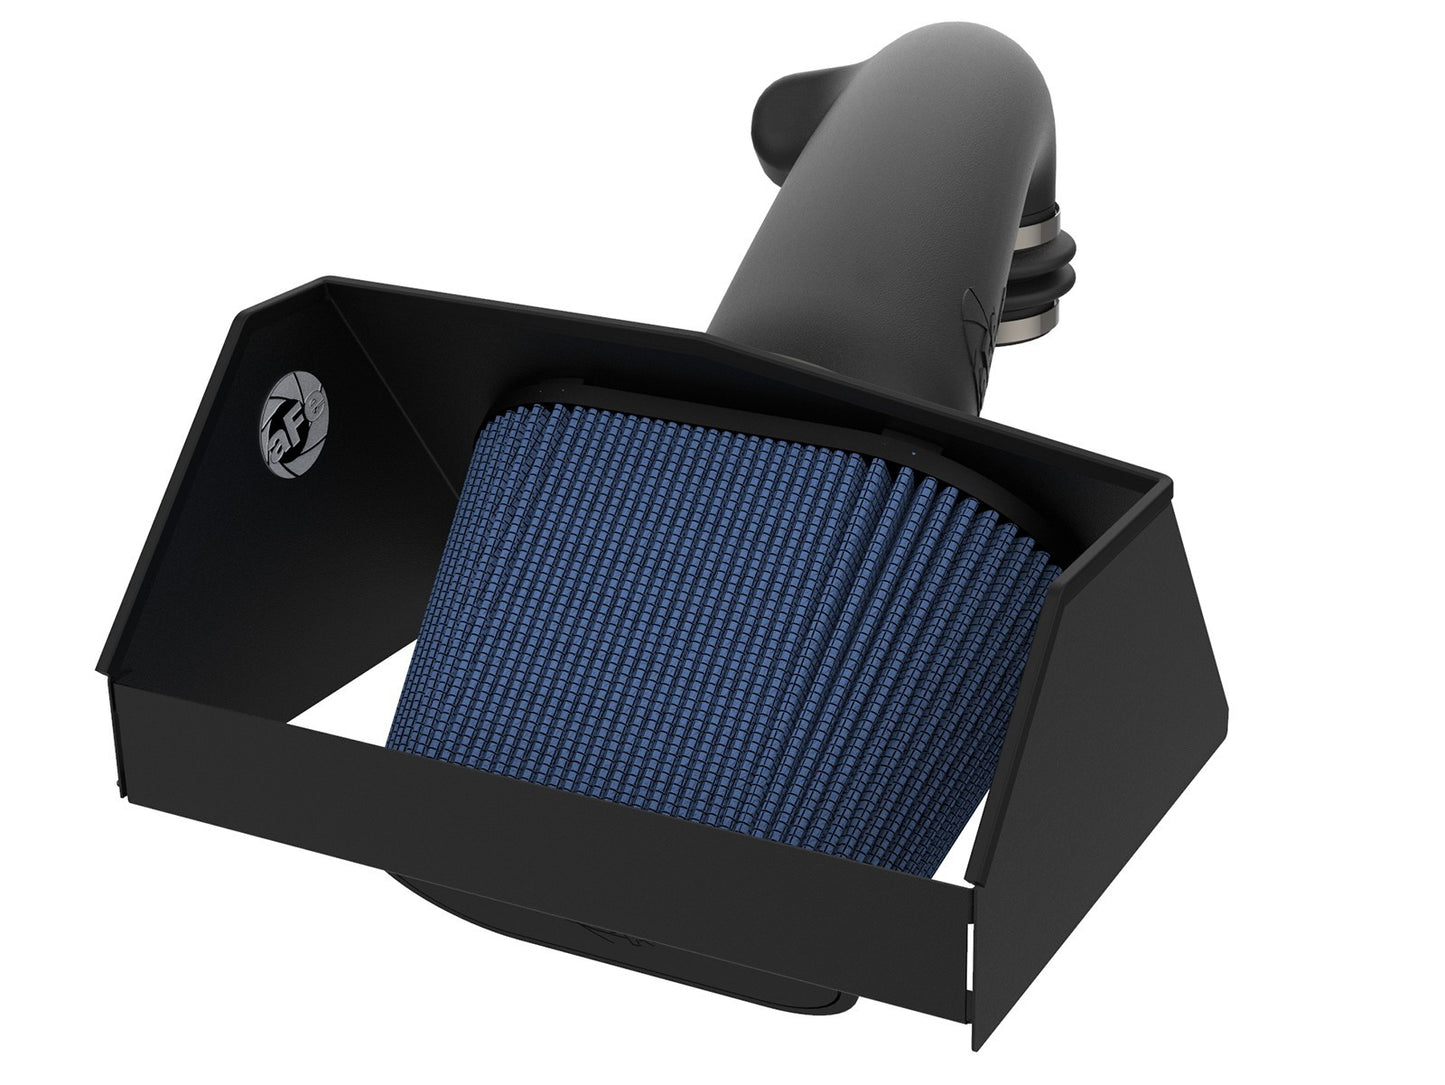 Magnum FORCE Stage-2 Cold Air Intake System w/Pro 5R Filter Media